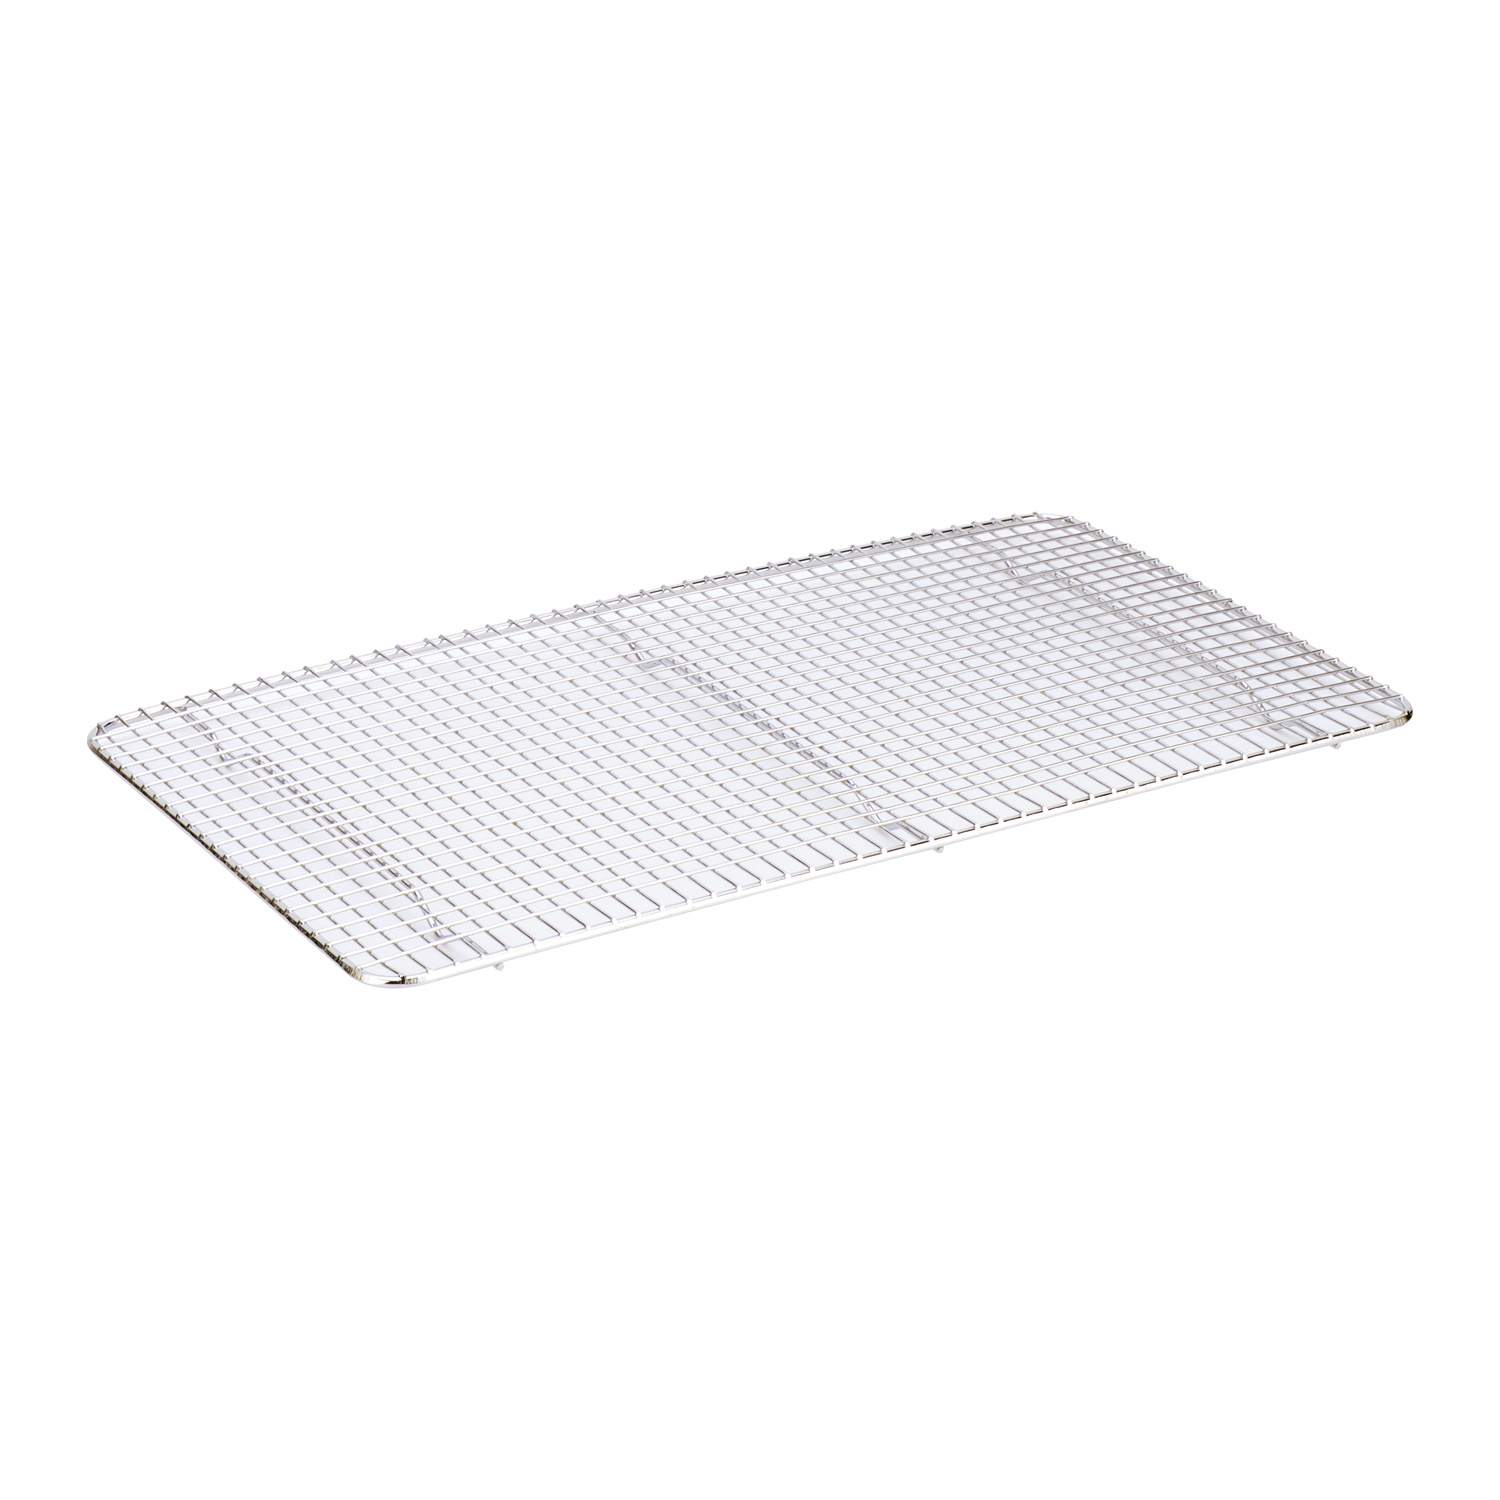 CAC China PGTP-1810 Full Size Sheet Pan with Footed Grate 18" x 10"